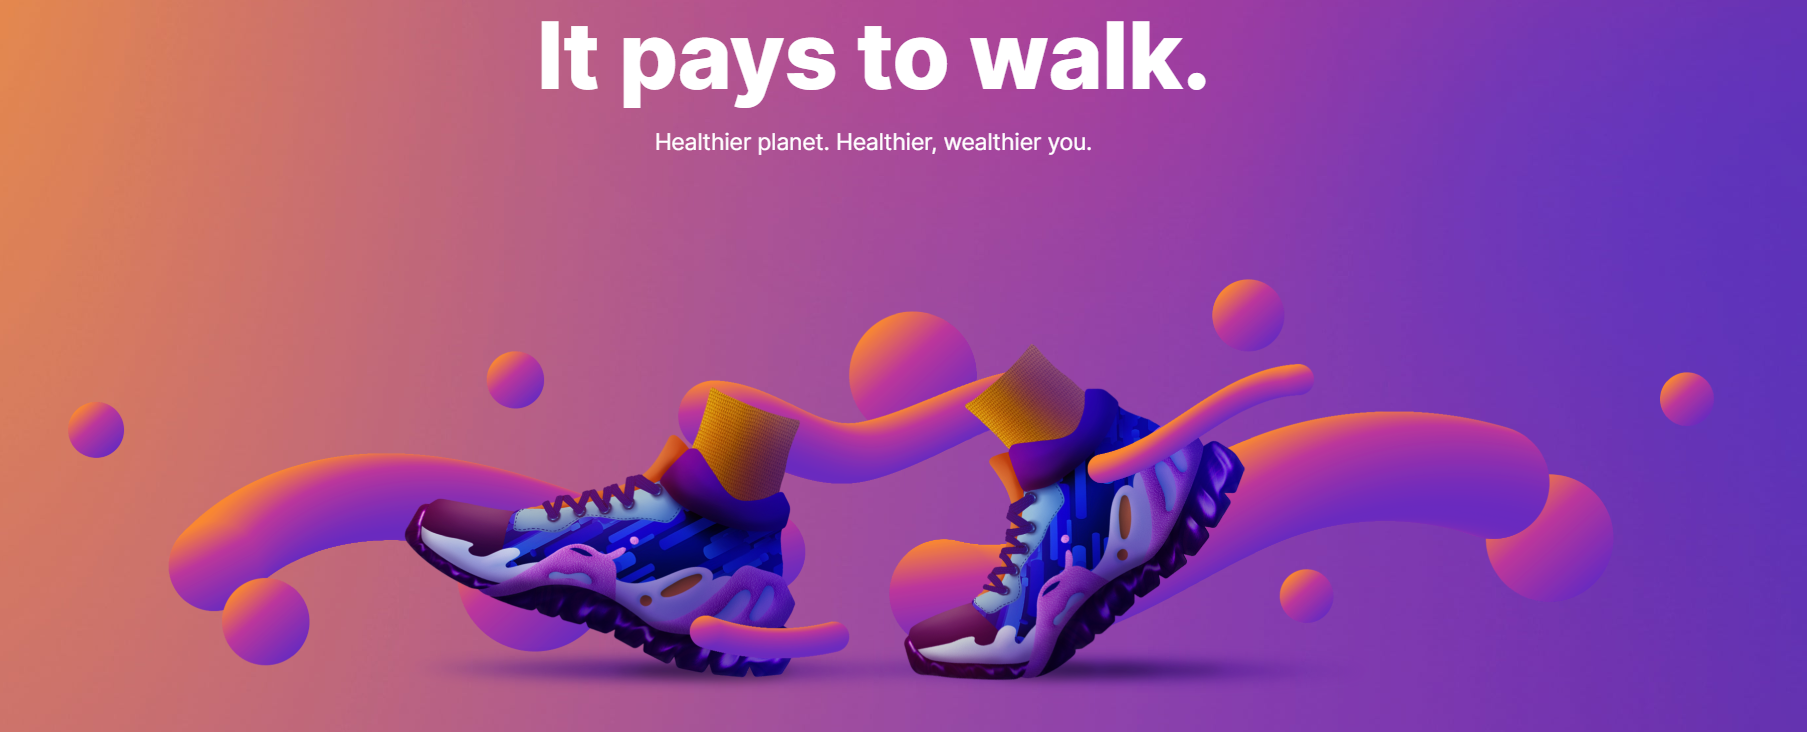 Earn rewards on your steps with Sweatcoin - Loyalty & Reward Co